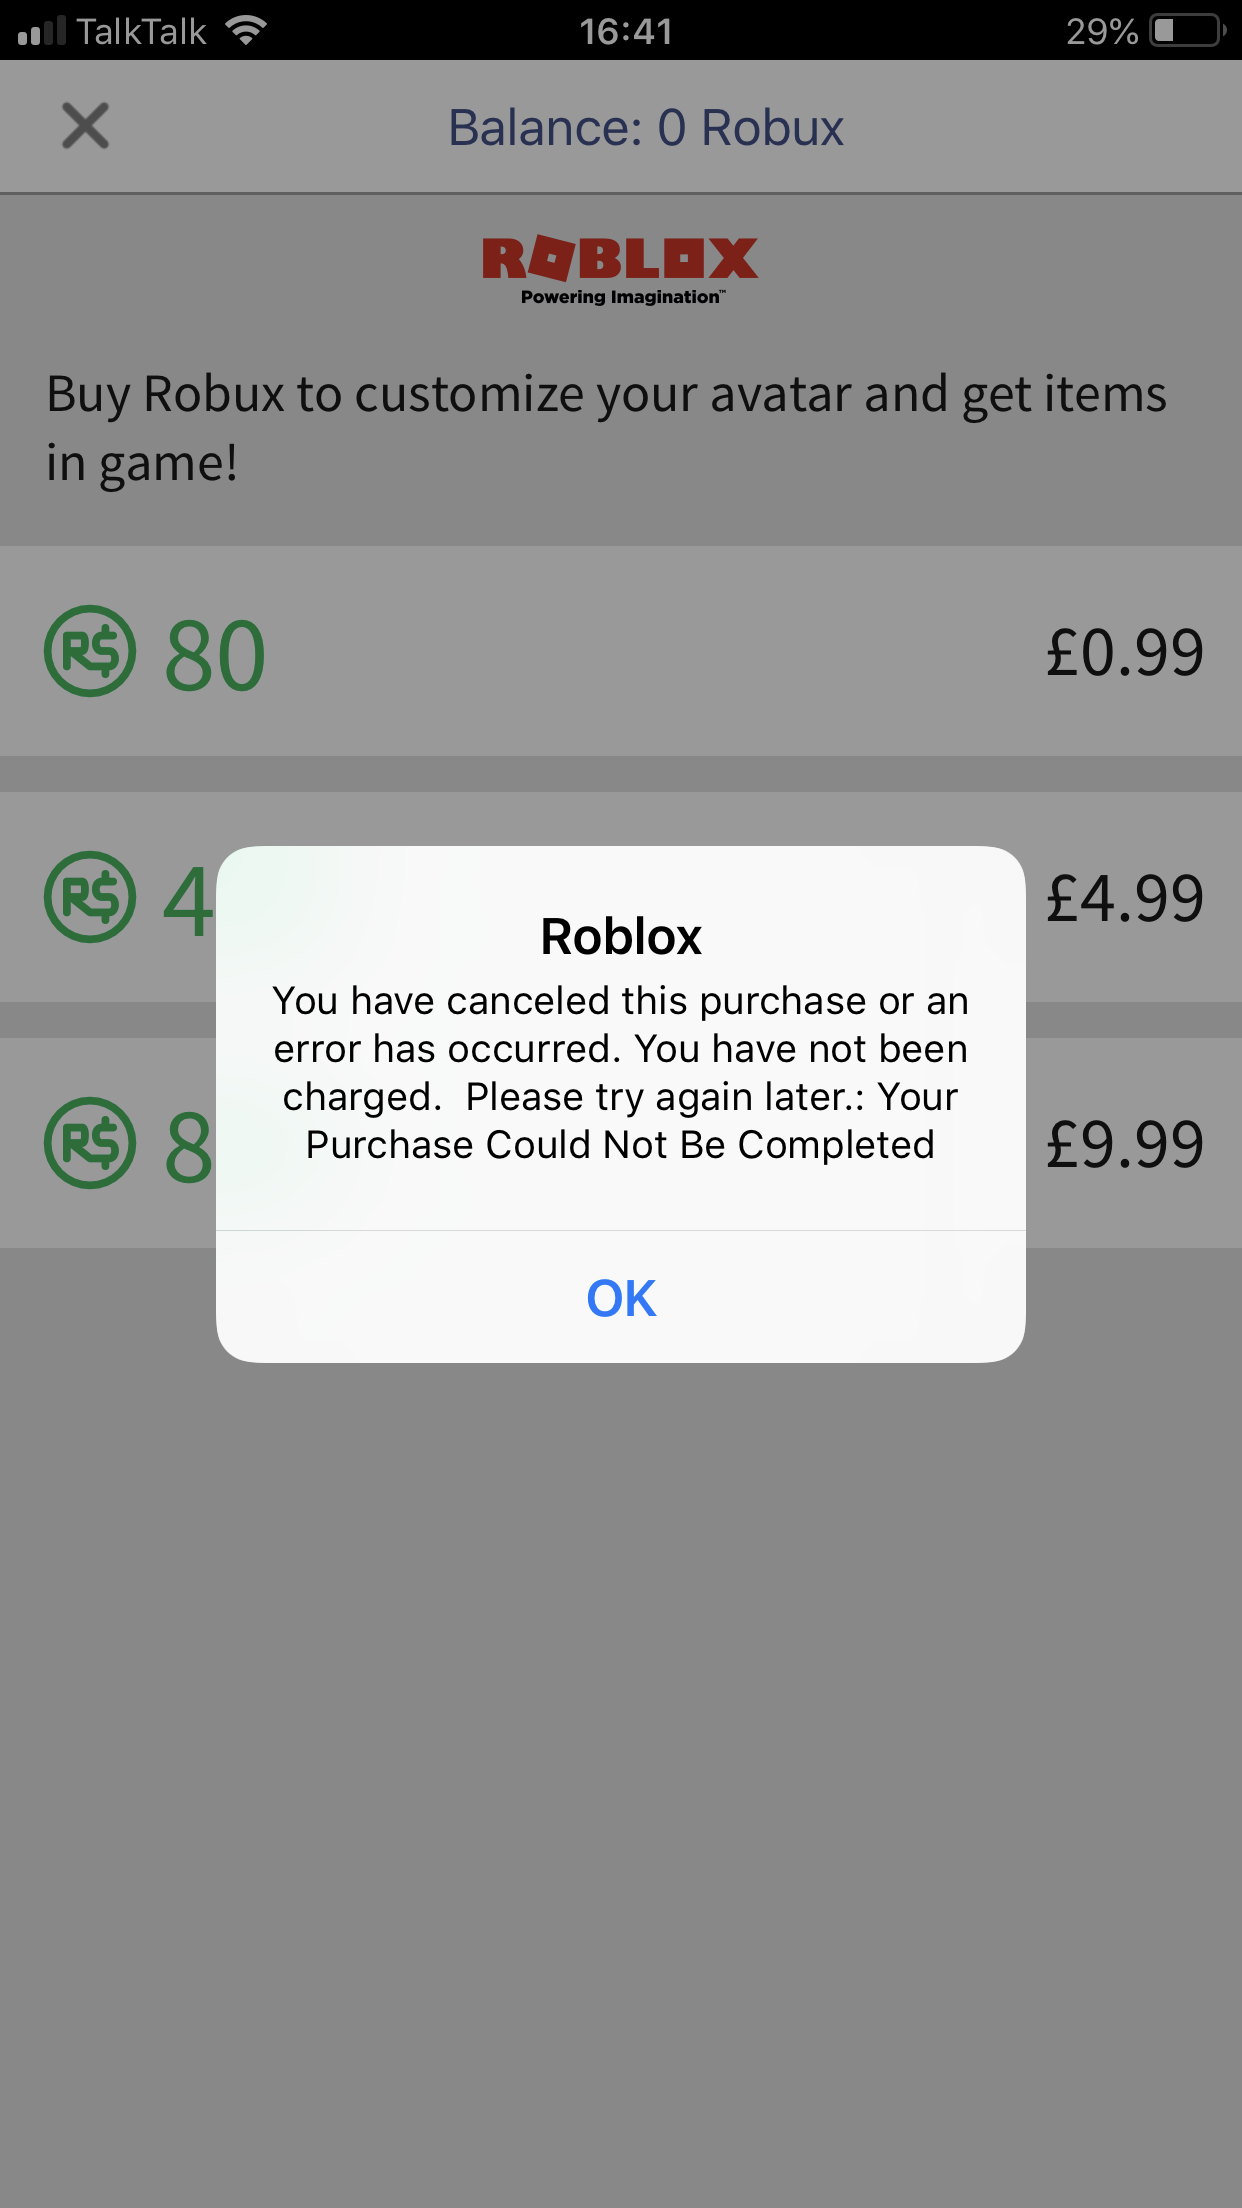 Help Robux Apple Community - balance 0 robux roblox buy robux to customize your avatar